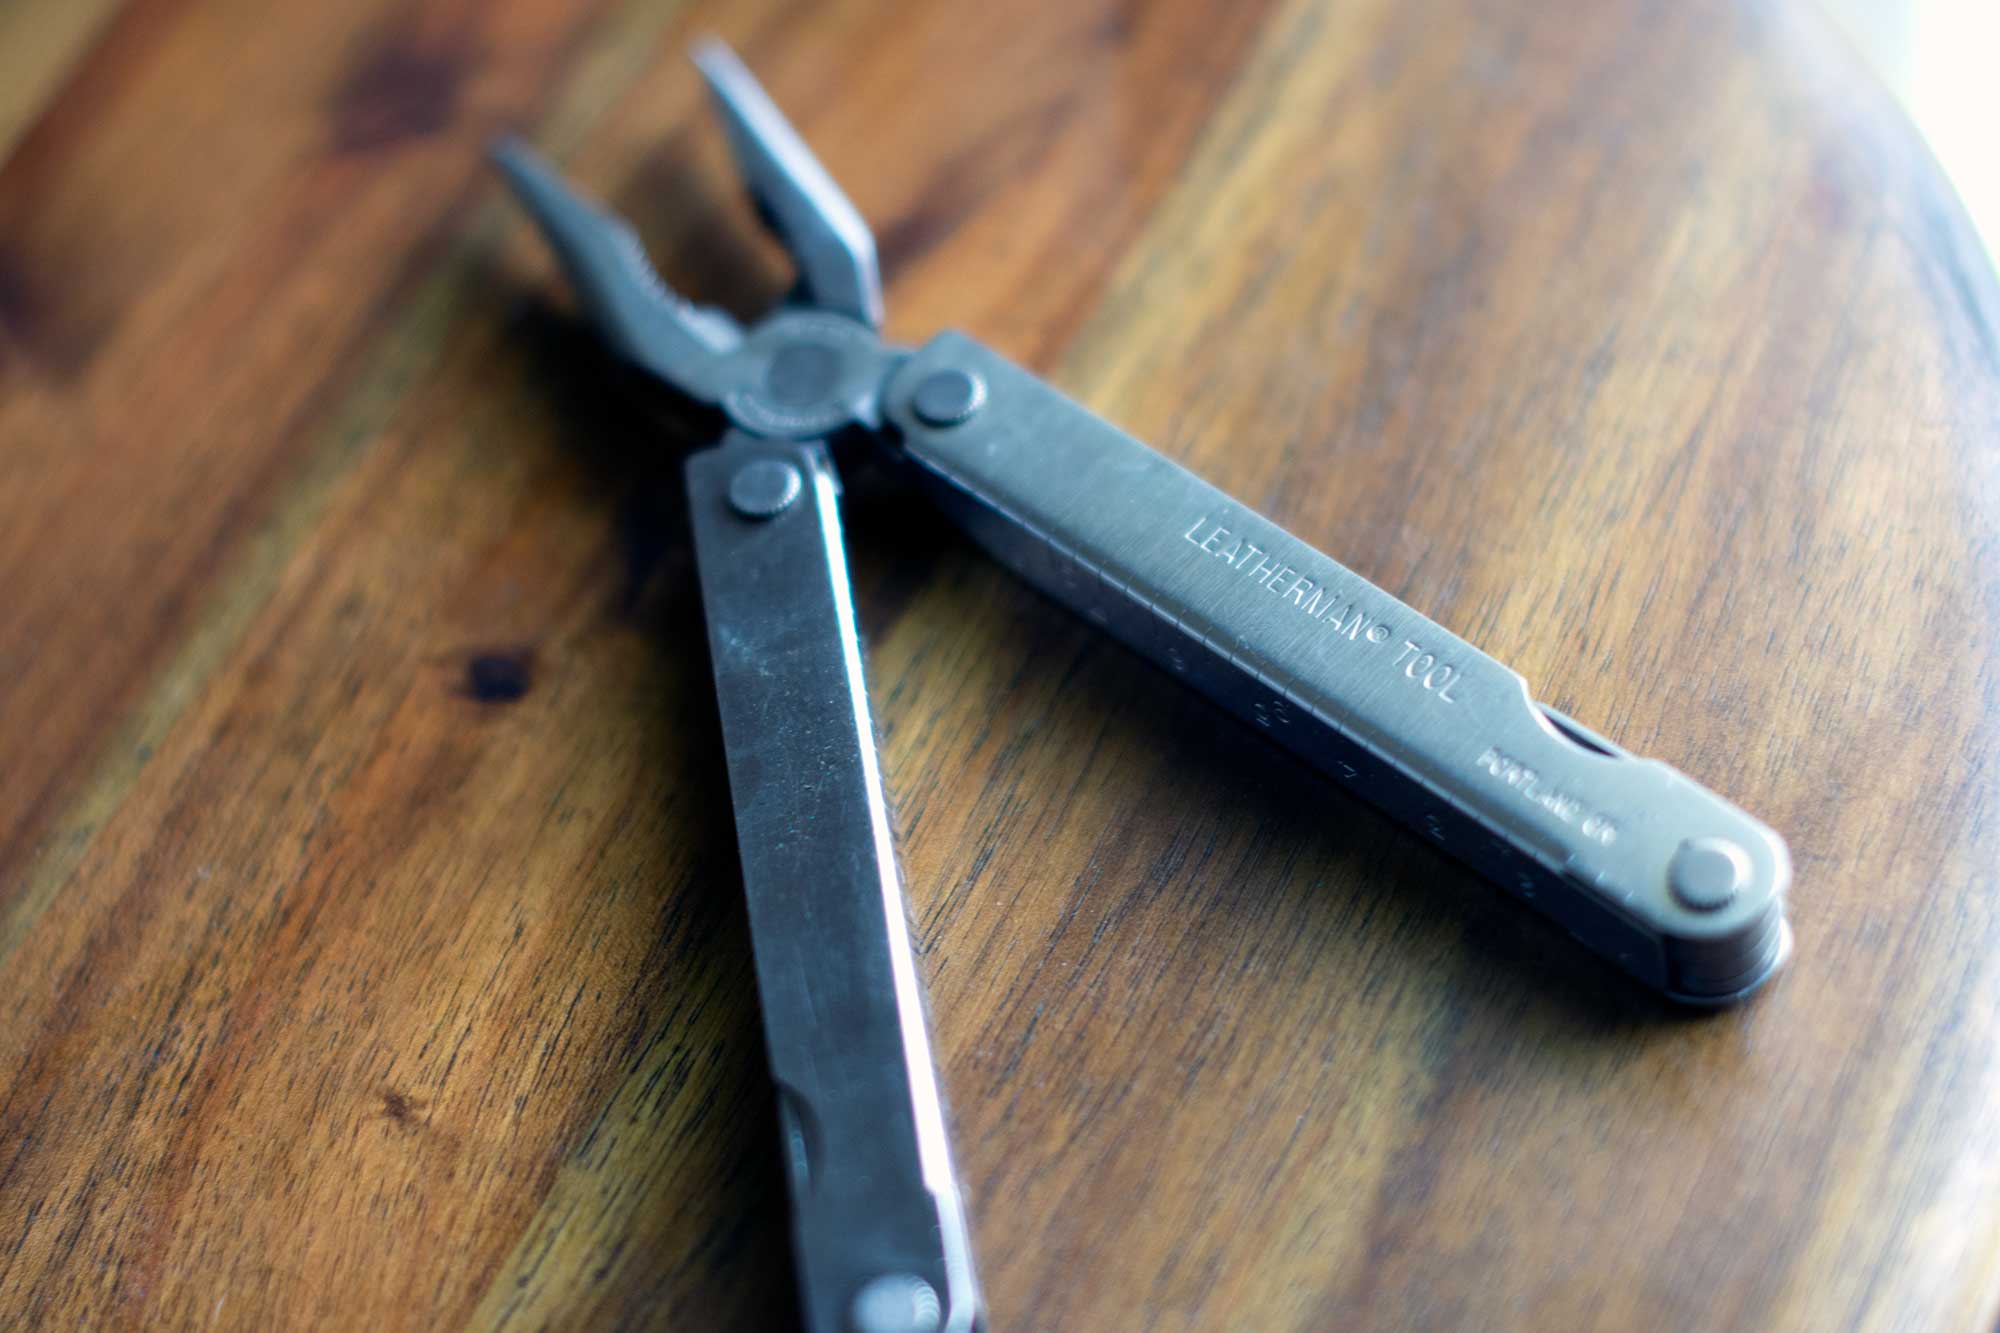 A silver multitool with the words Leatherman tool and Portland, Oregon engraved on it, with needle nose pliers extended